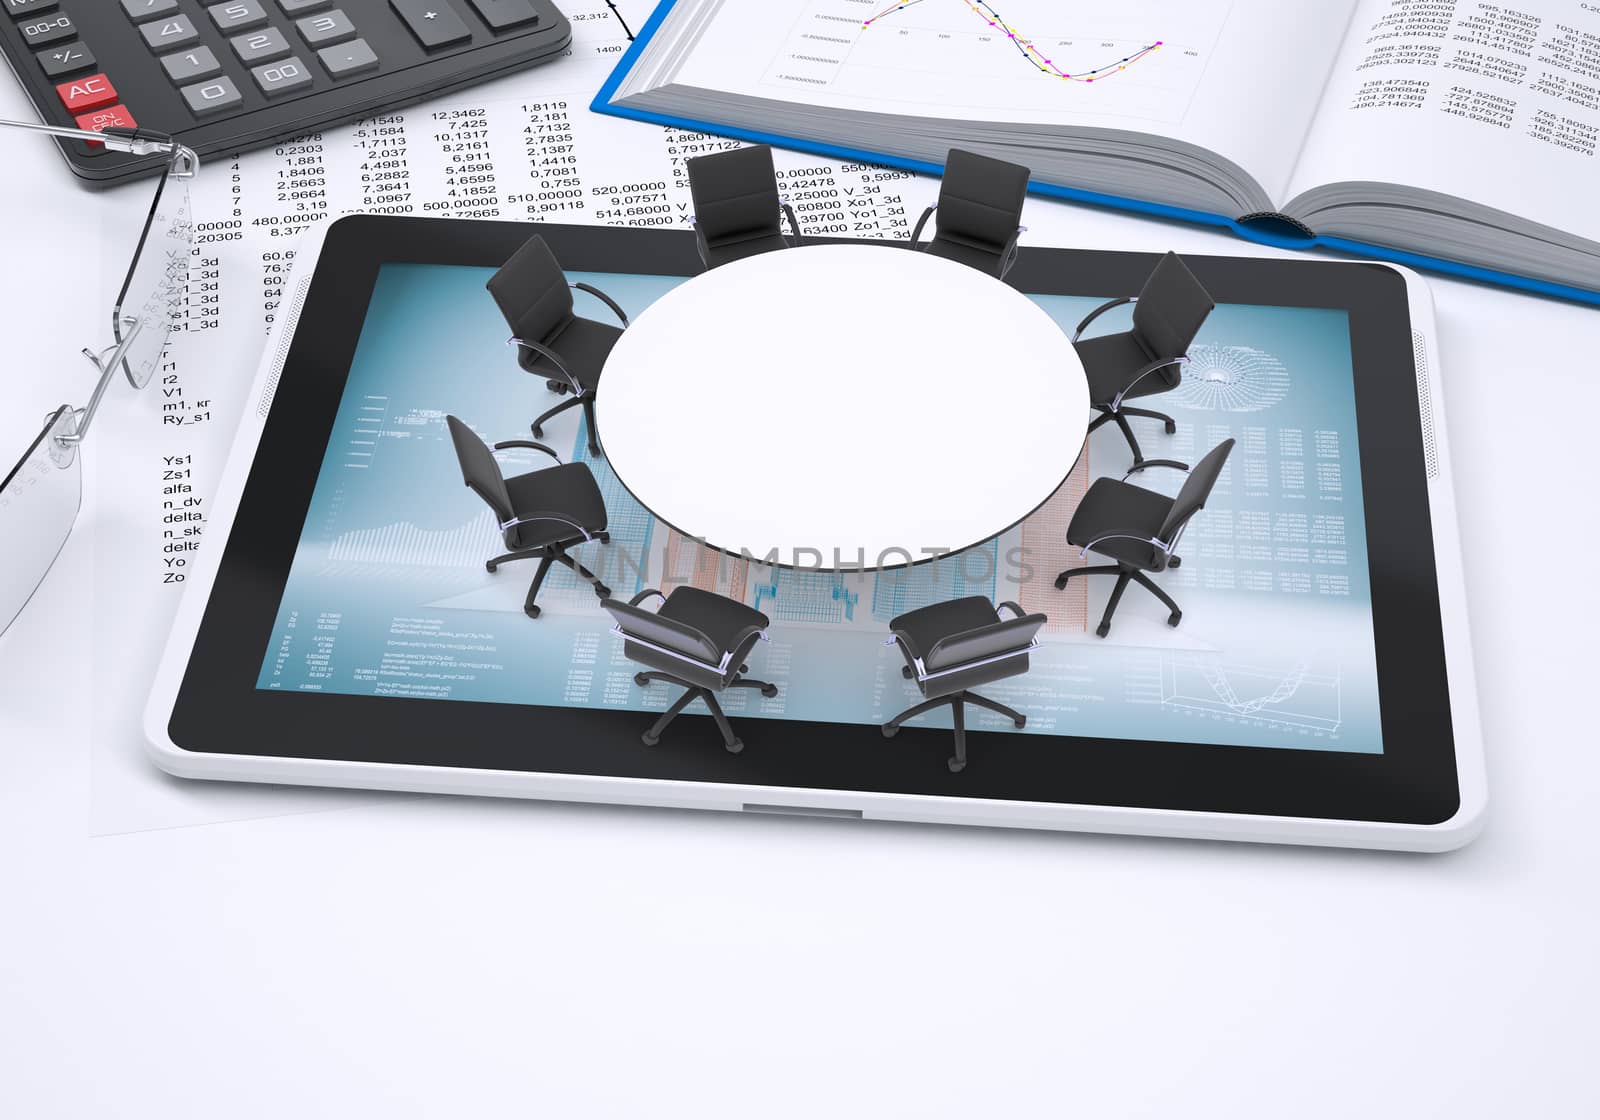 Miniature round table with chairs placed on tablet pc, book, calculator and glasses, all on paper with columns of figures. Business concept.